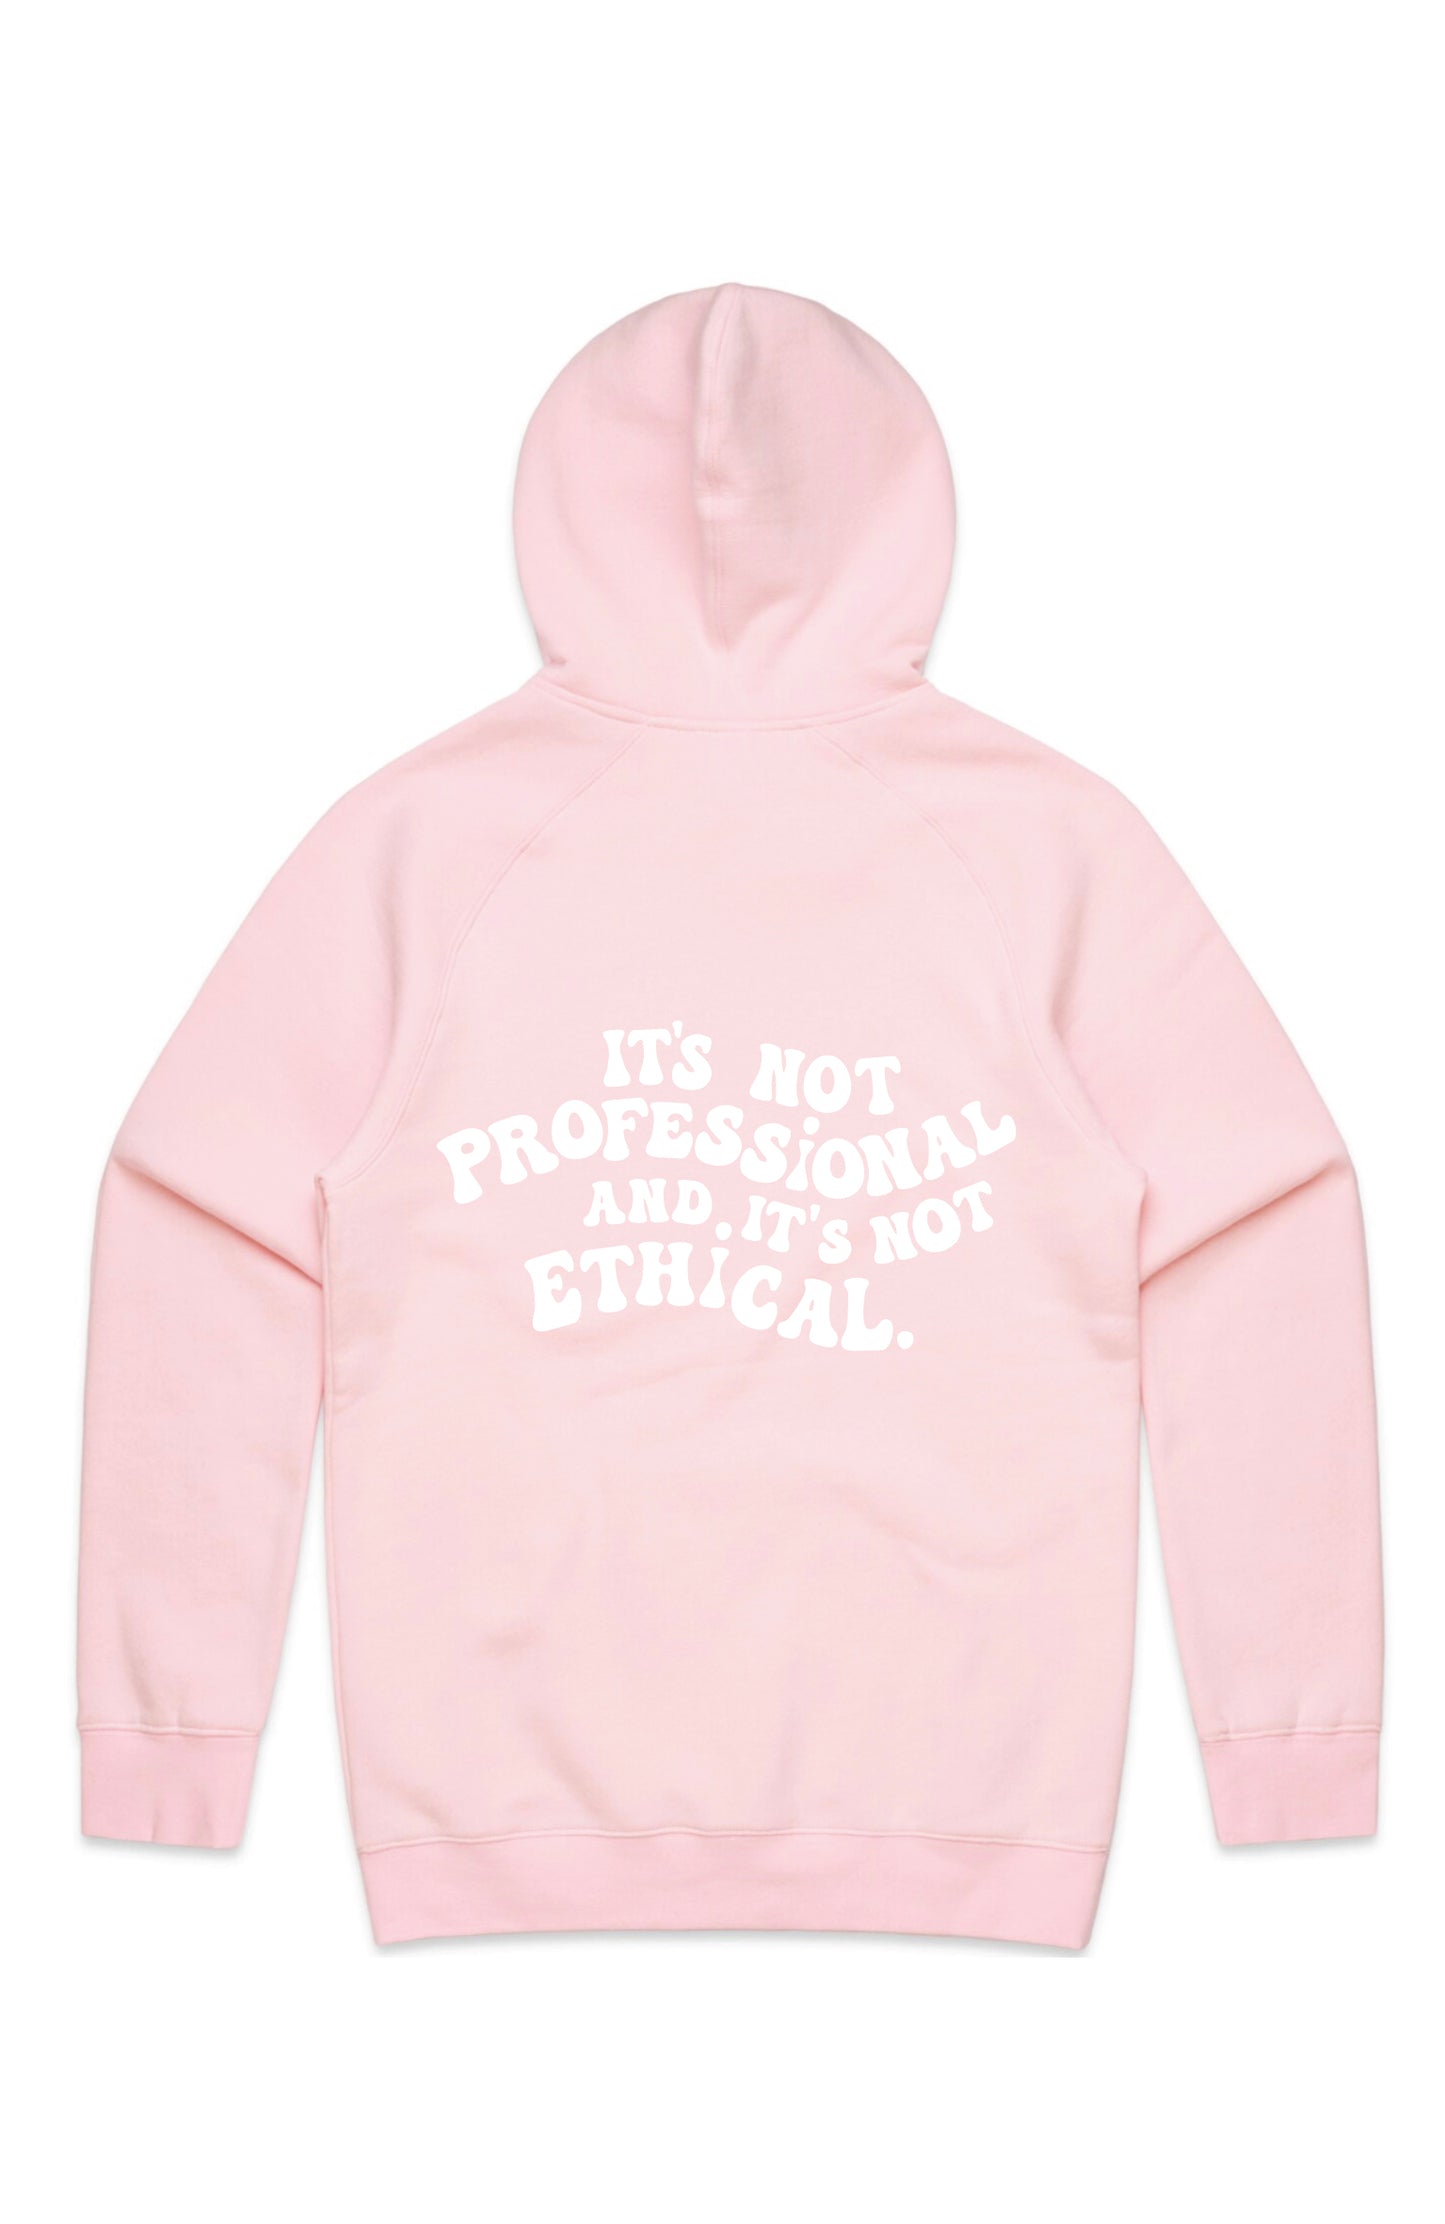 PROFESSIONAL & ETHICAL HOODIE (PINK)